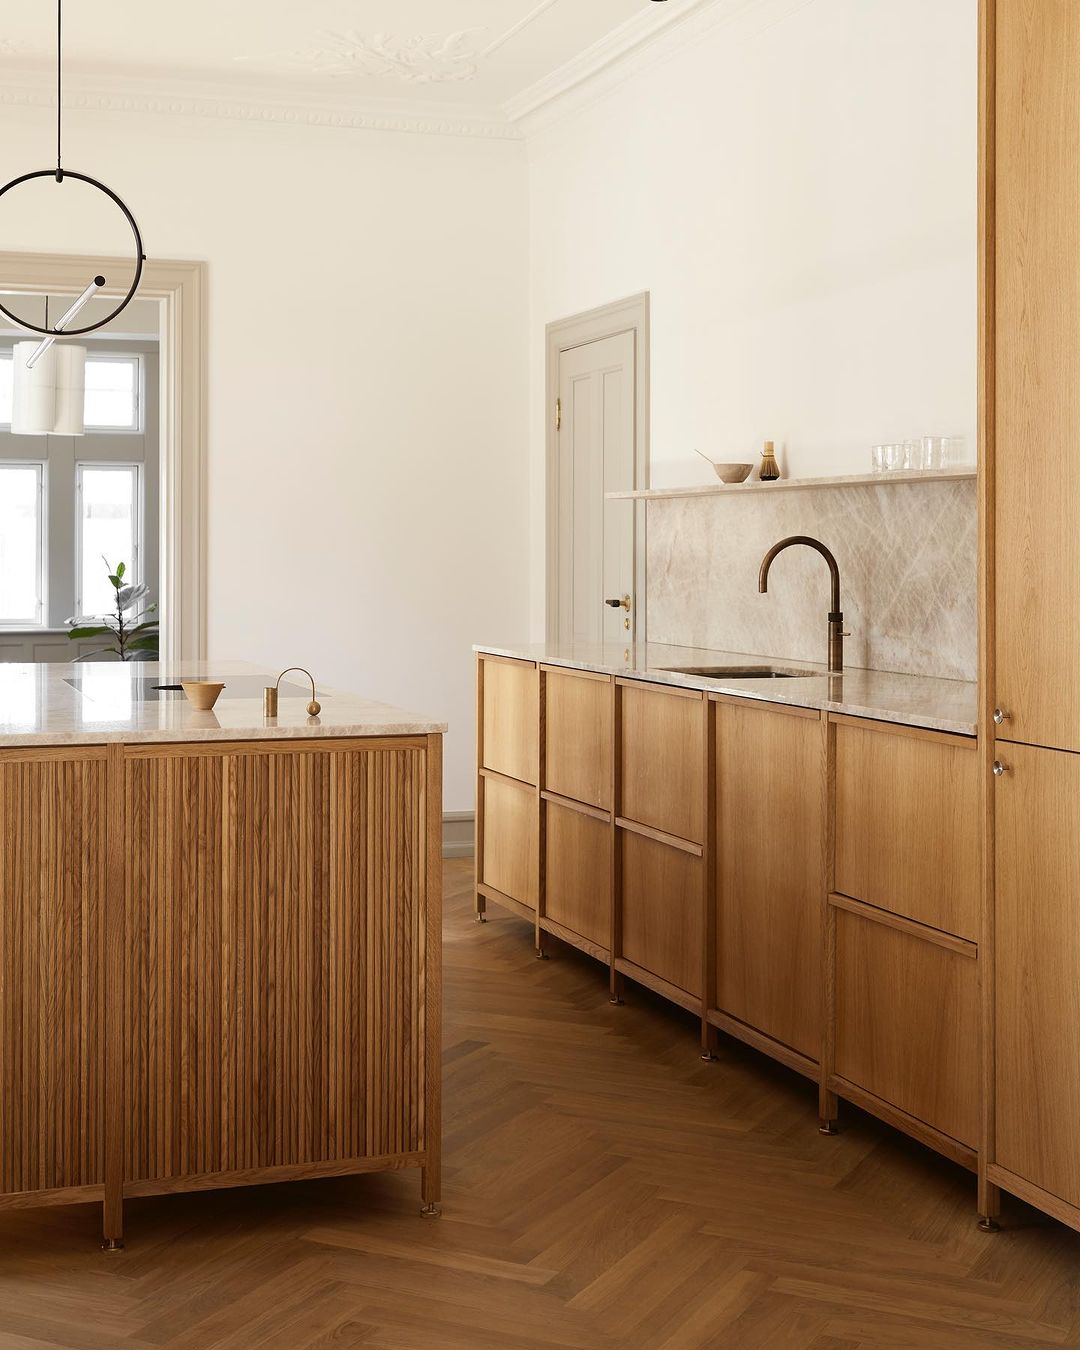 Minimalist Elegance with Natural Wood Cabinets